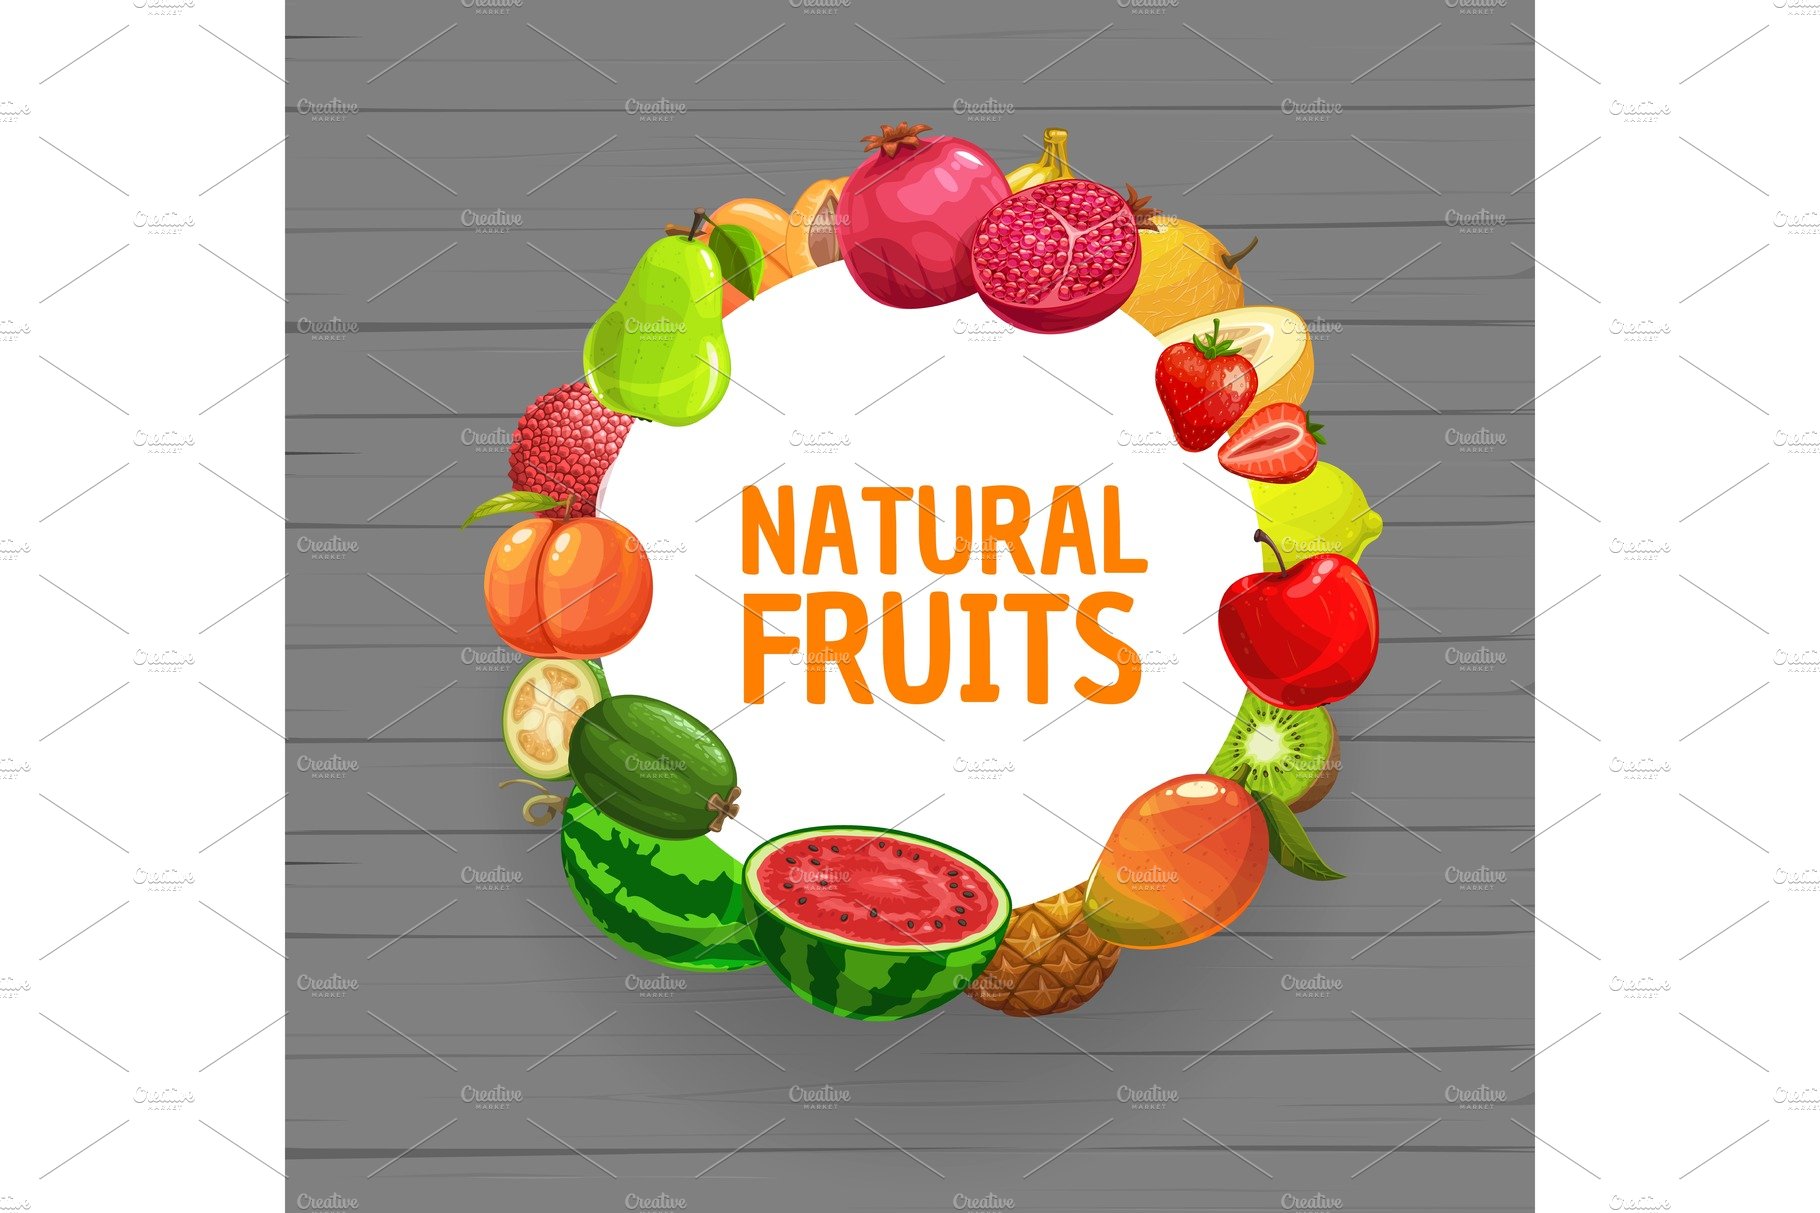 Tropical fruits and berries cover image.